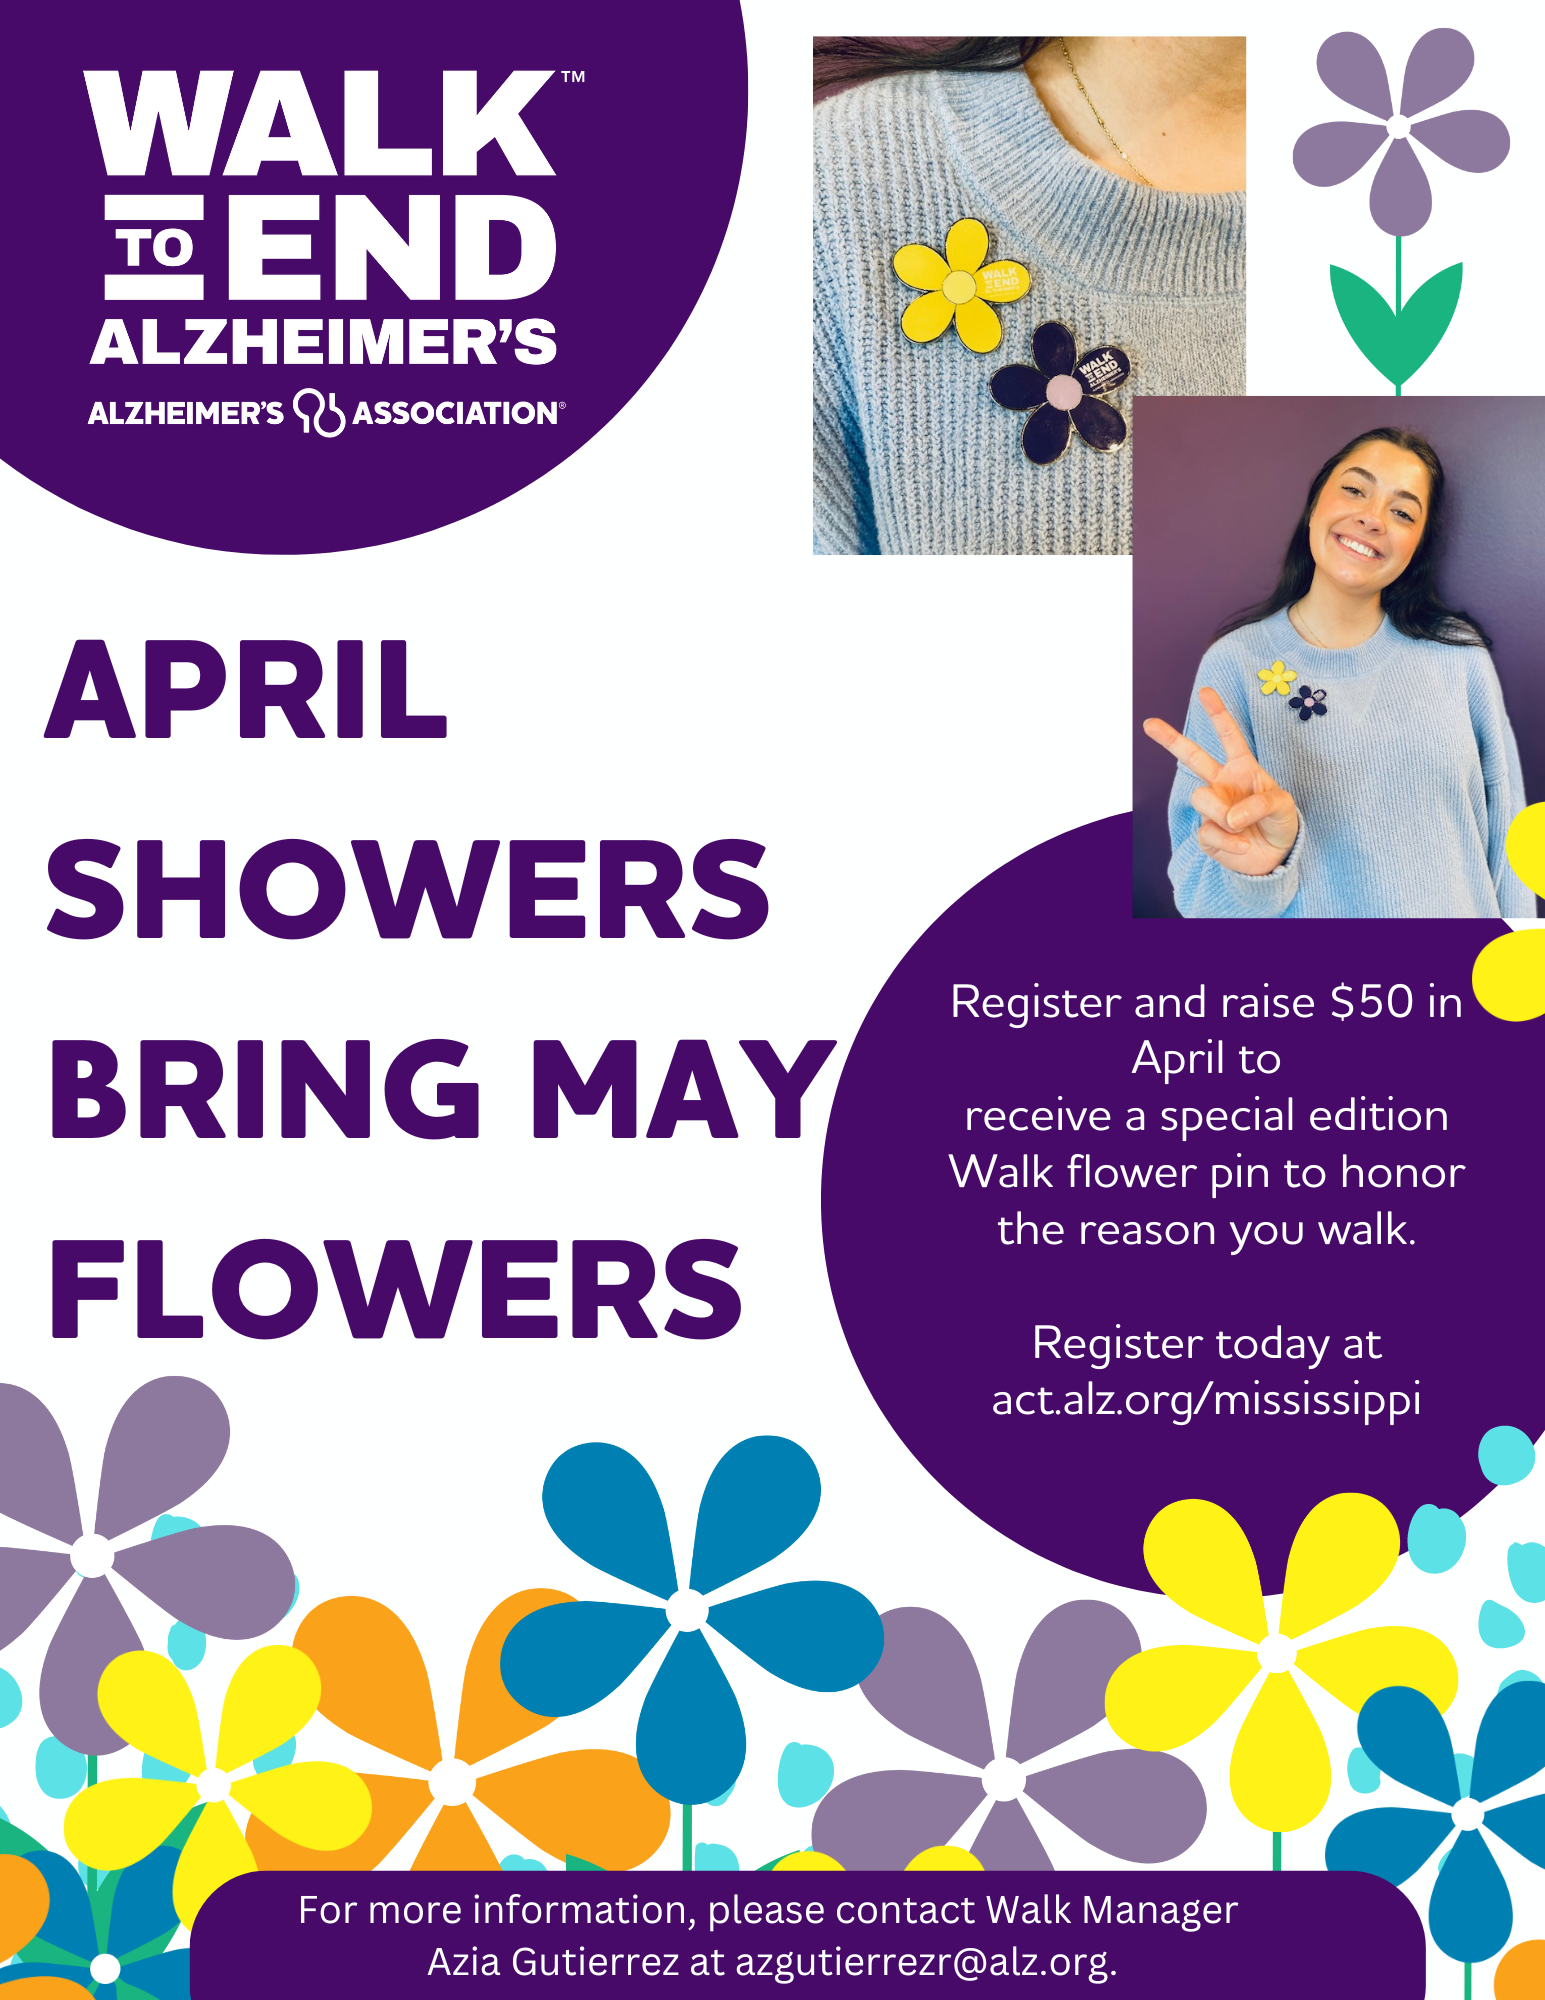 April showers bring may flowers (1).png